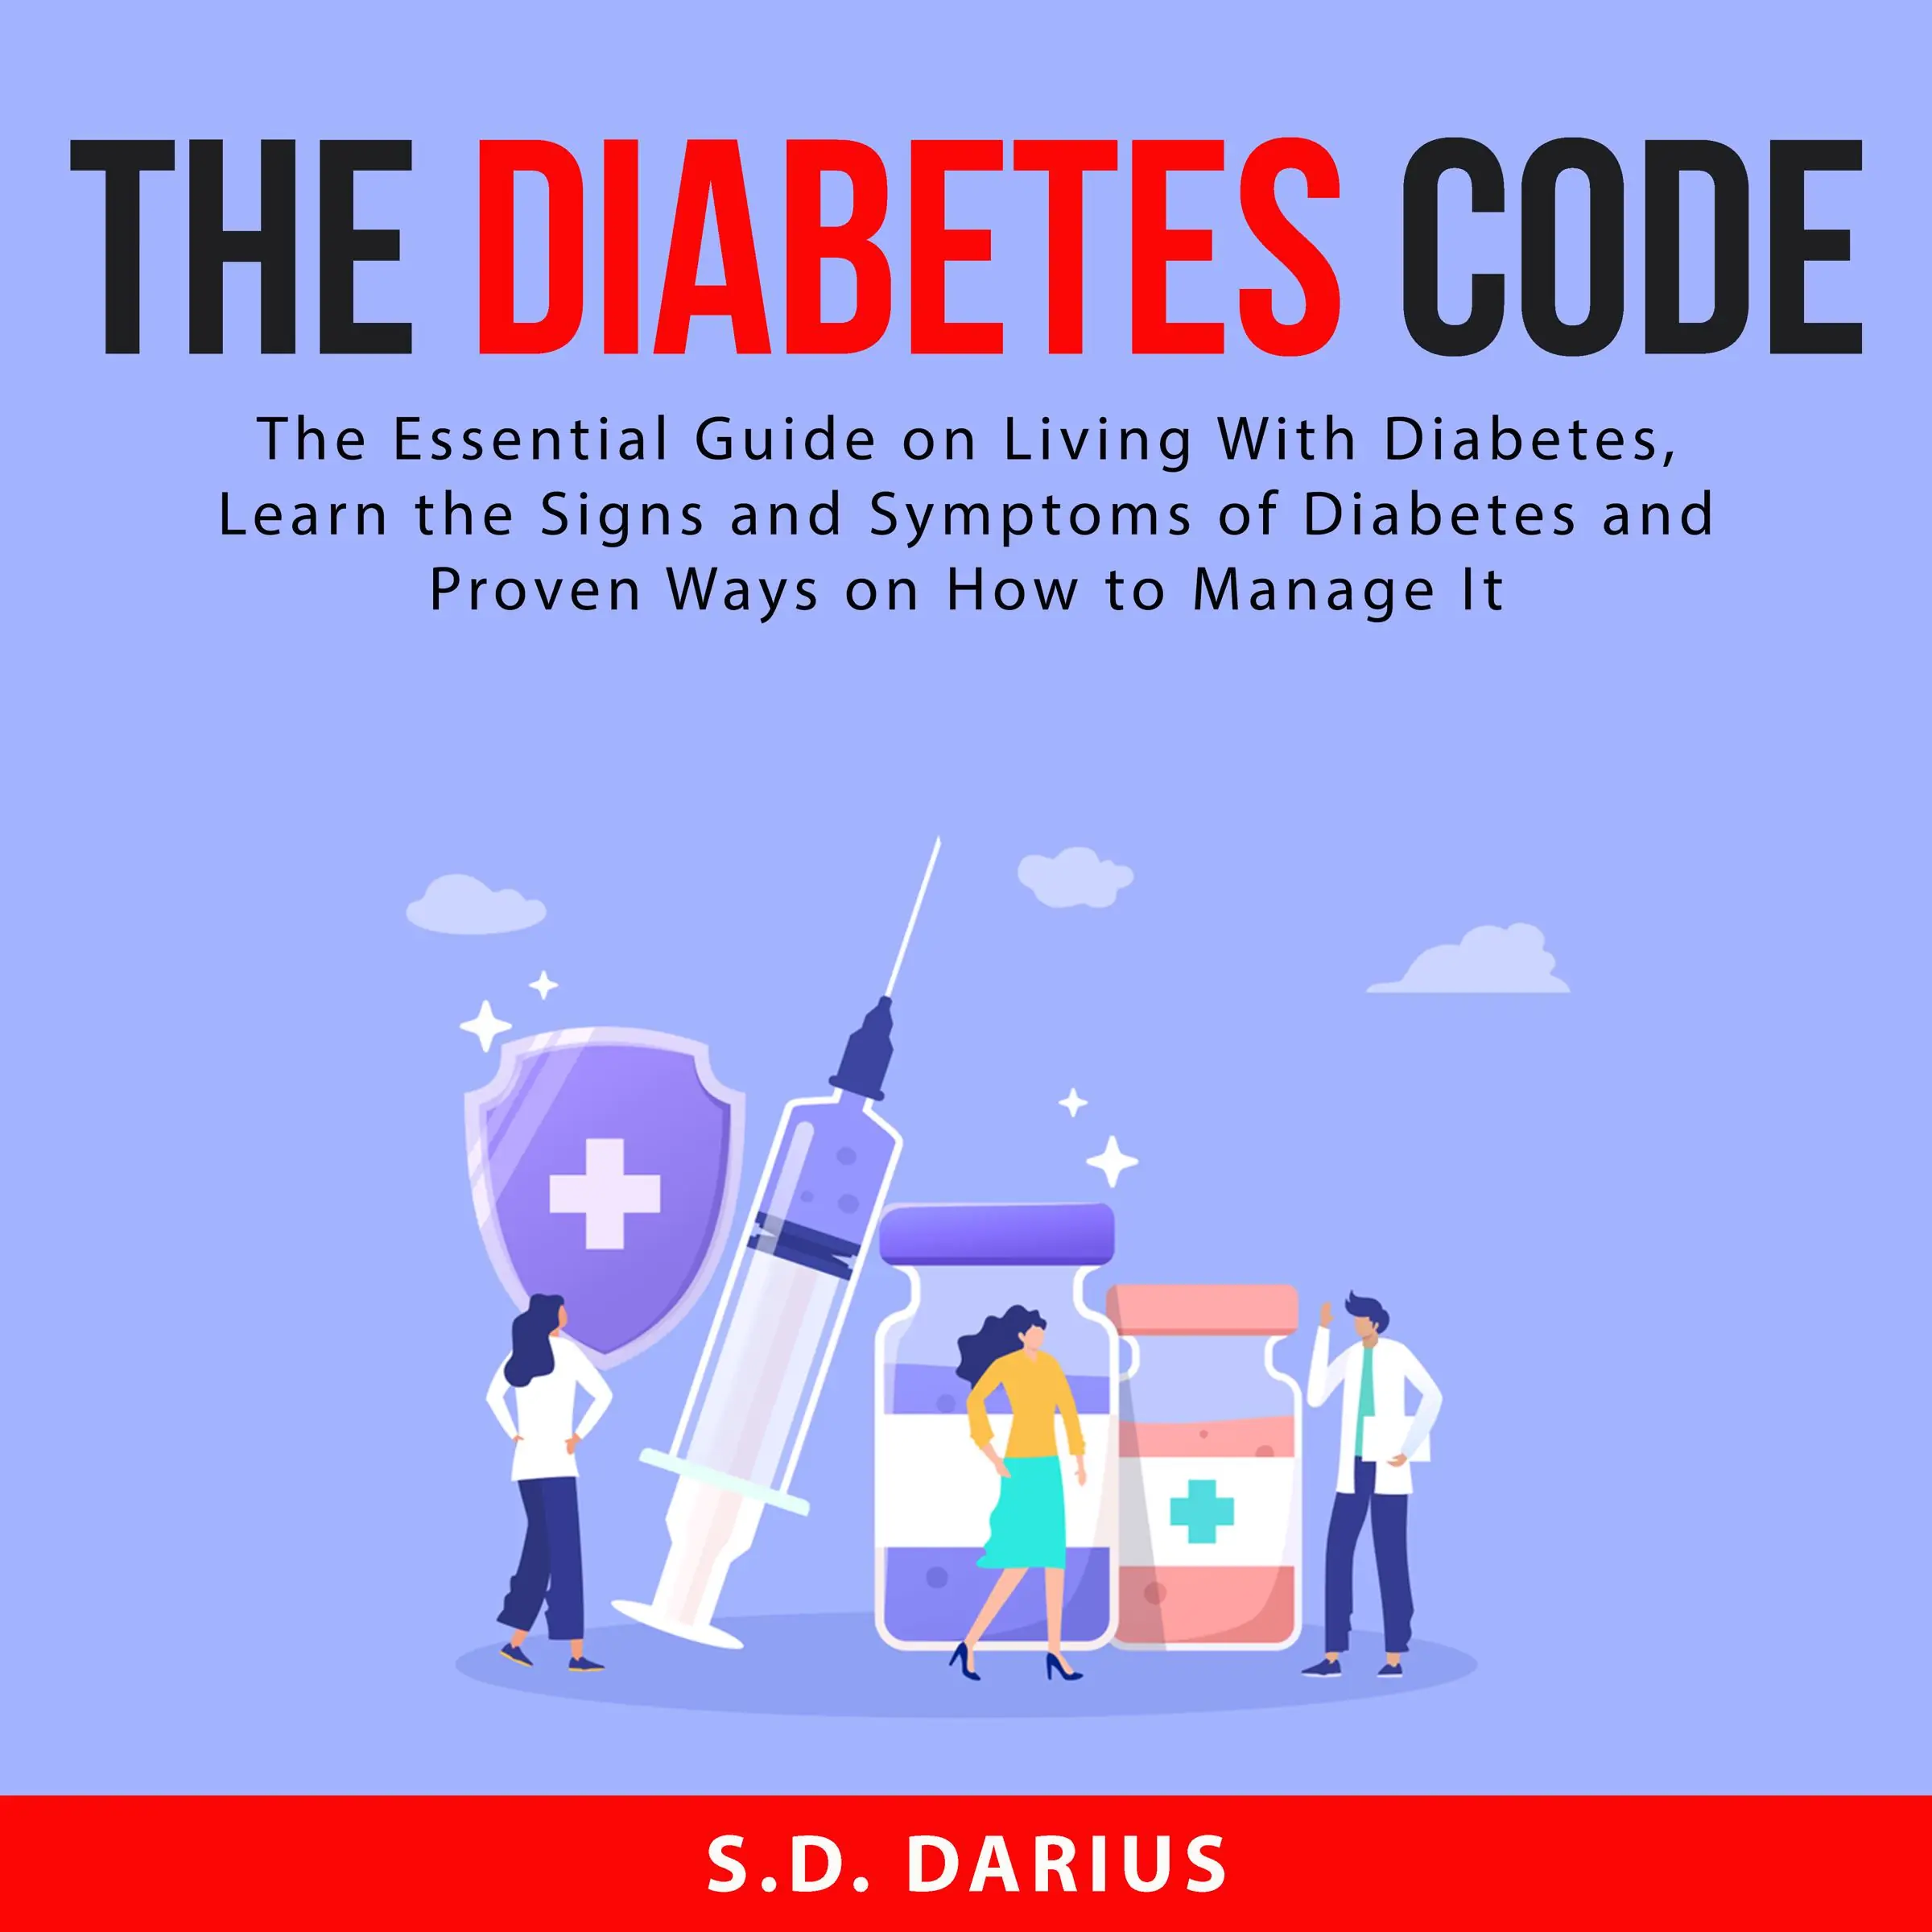 The Diabetes Code: The Essential Guide on Living With Diabetes, Learn the Signs and Symptoms of Diabetes and Proven Ways on How to Manage It by S.D. Darius Audiobook